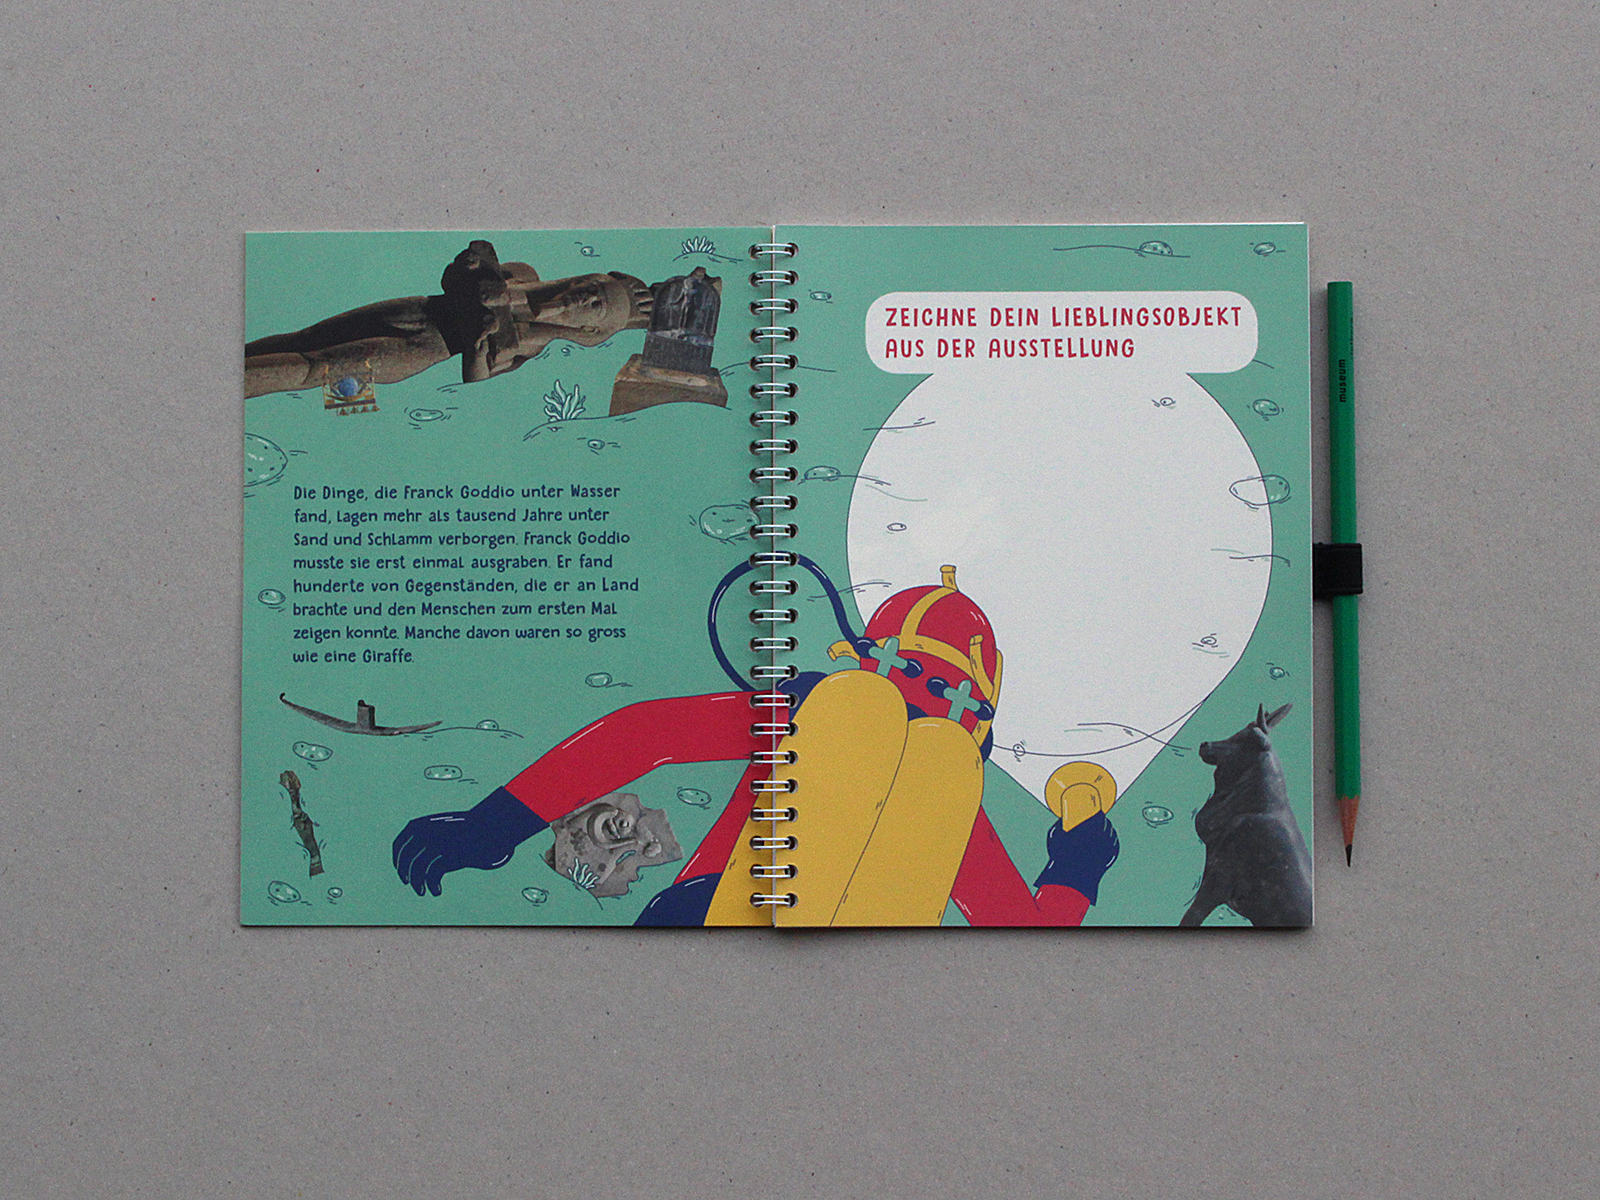 On this page the children can draw their favorite object from the exhibition